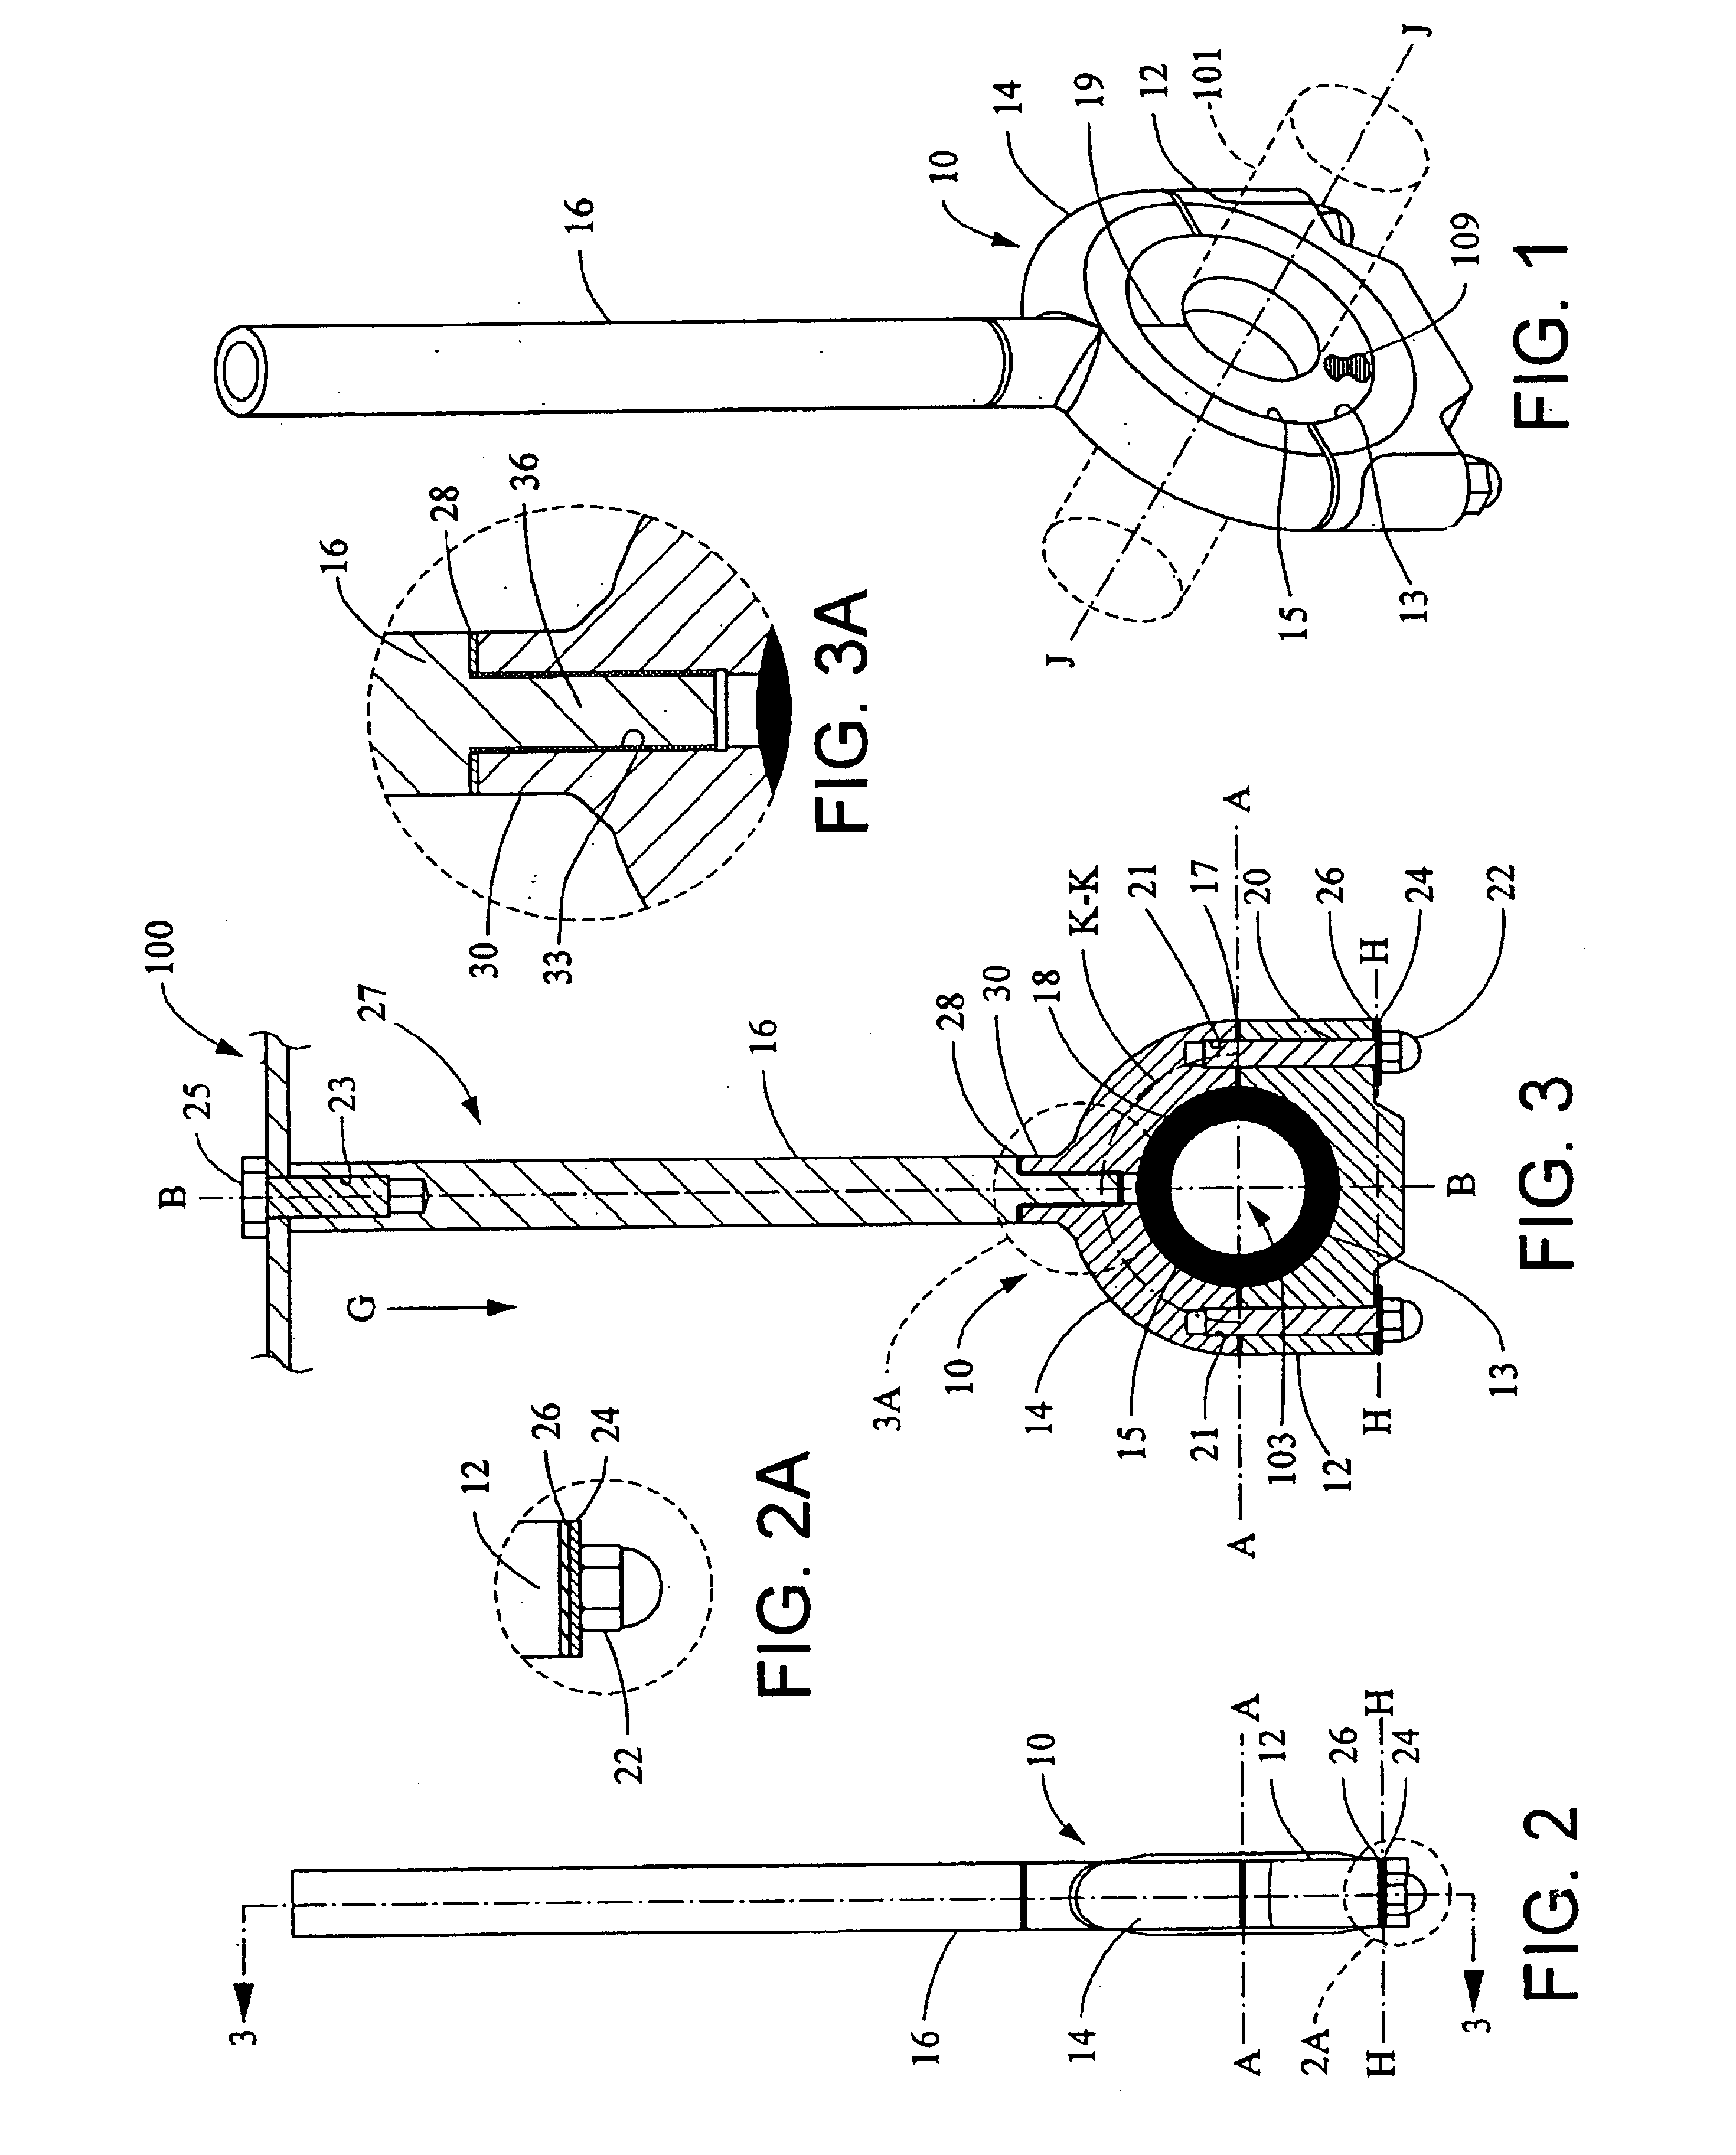 Sanitary conduit support systems and methods